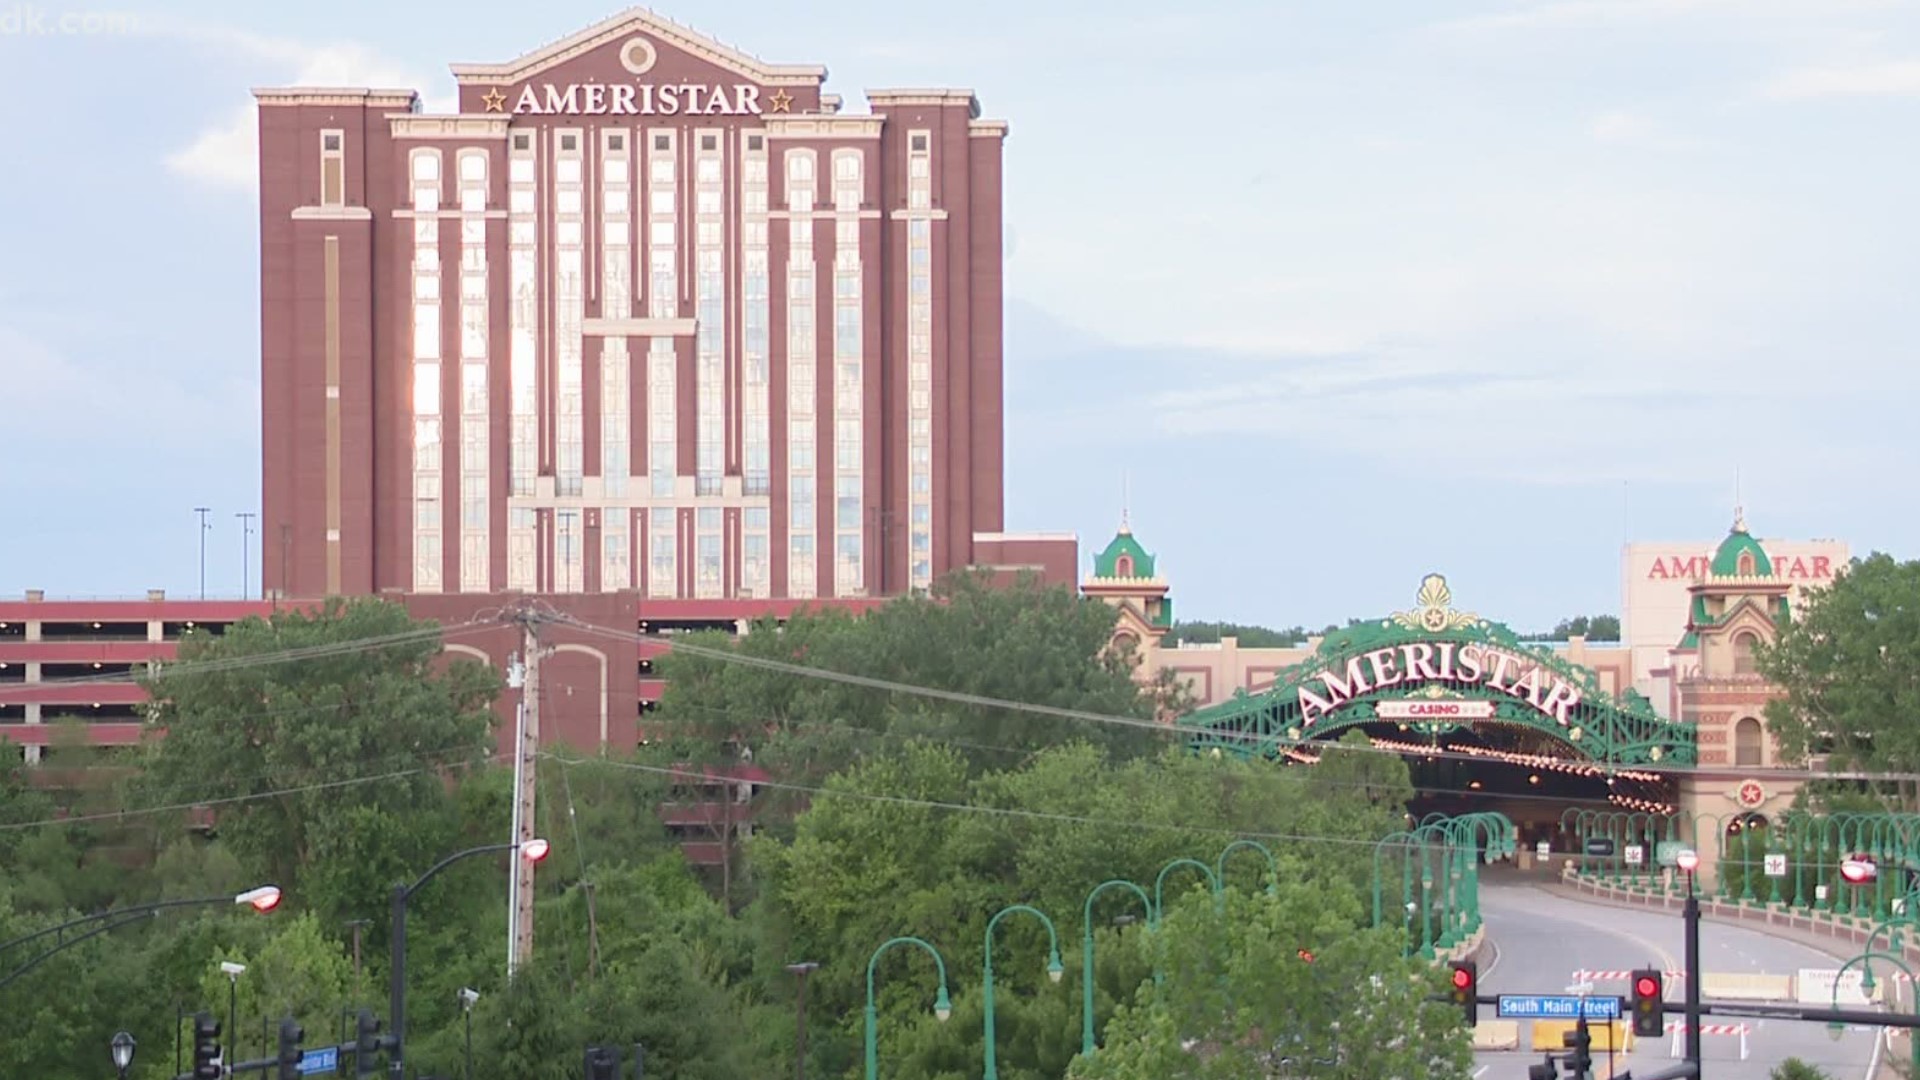 Las vegas casino rules for reopening